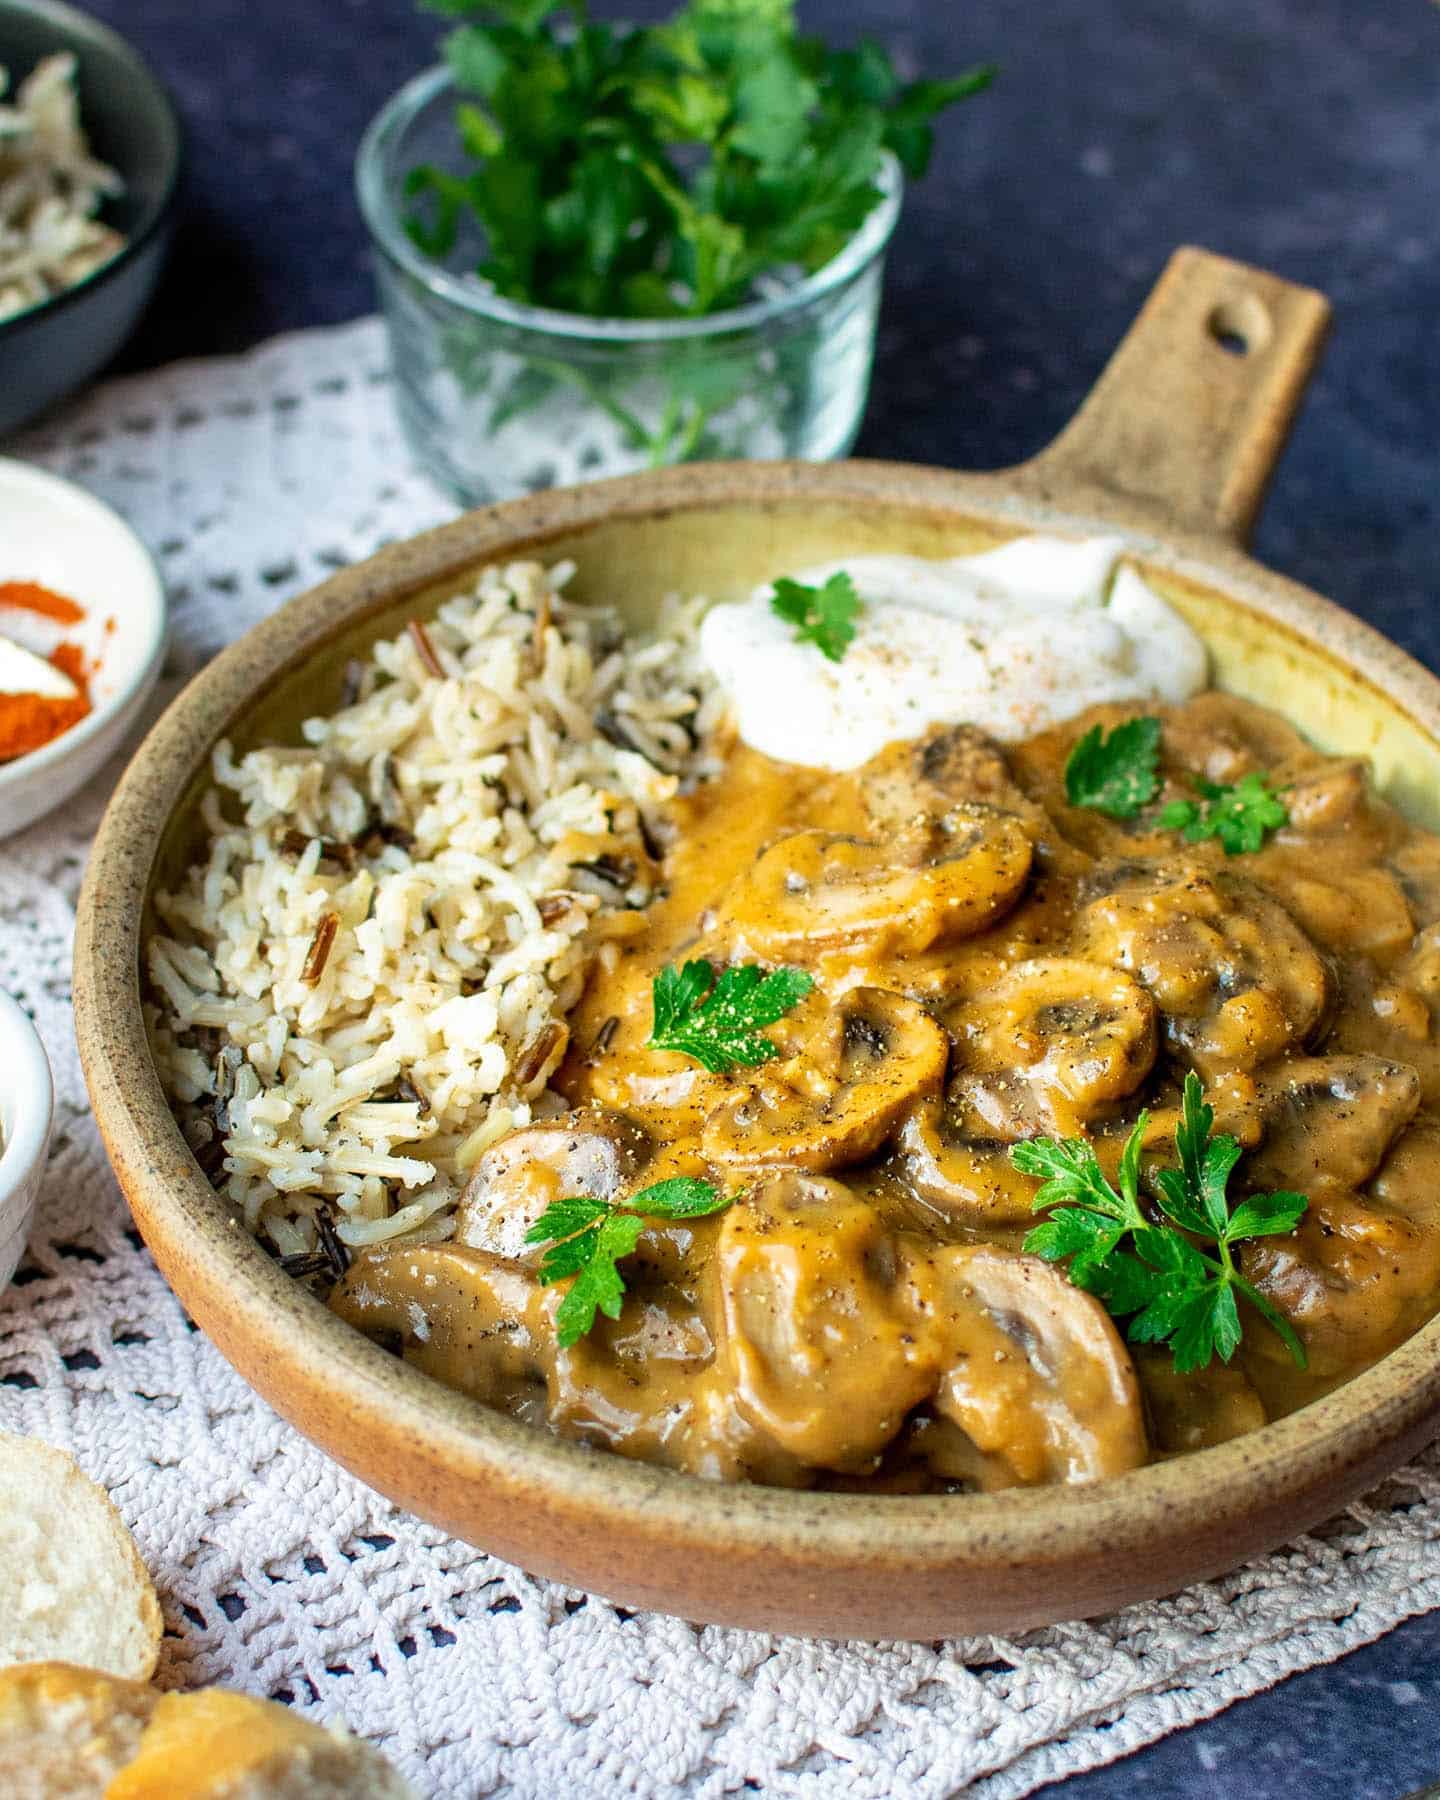 A close-up photo of a bowl of vegan stroganoff. It's a rich, golden brown colour and is filled with mushrooms.